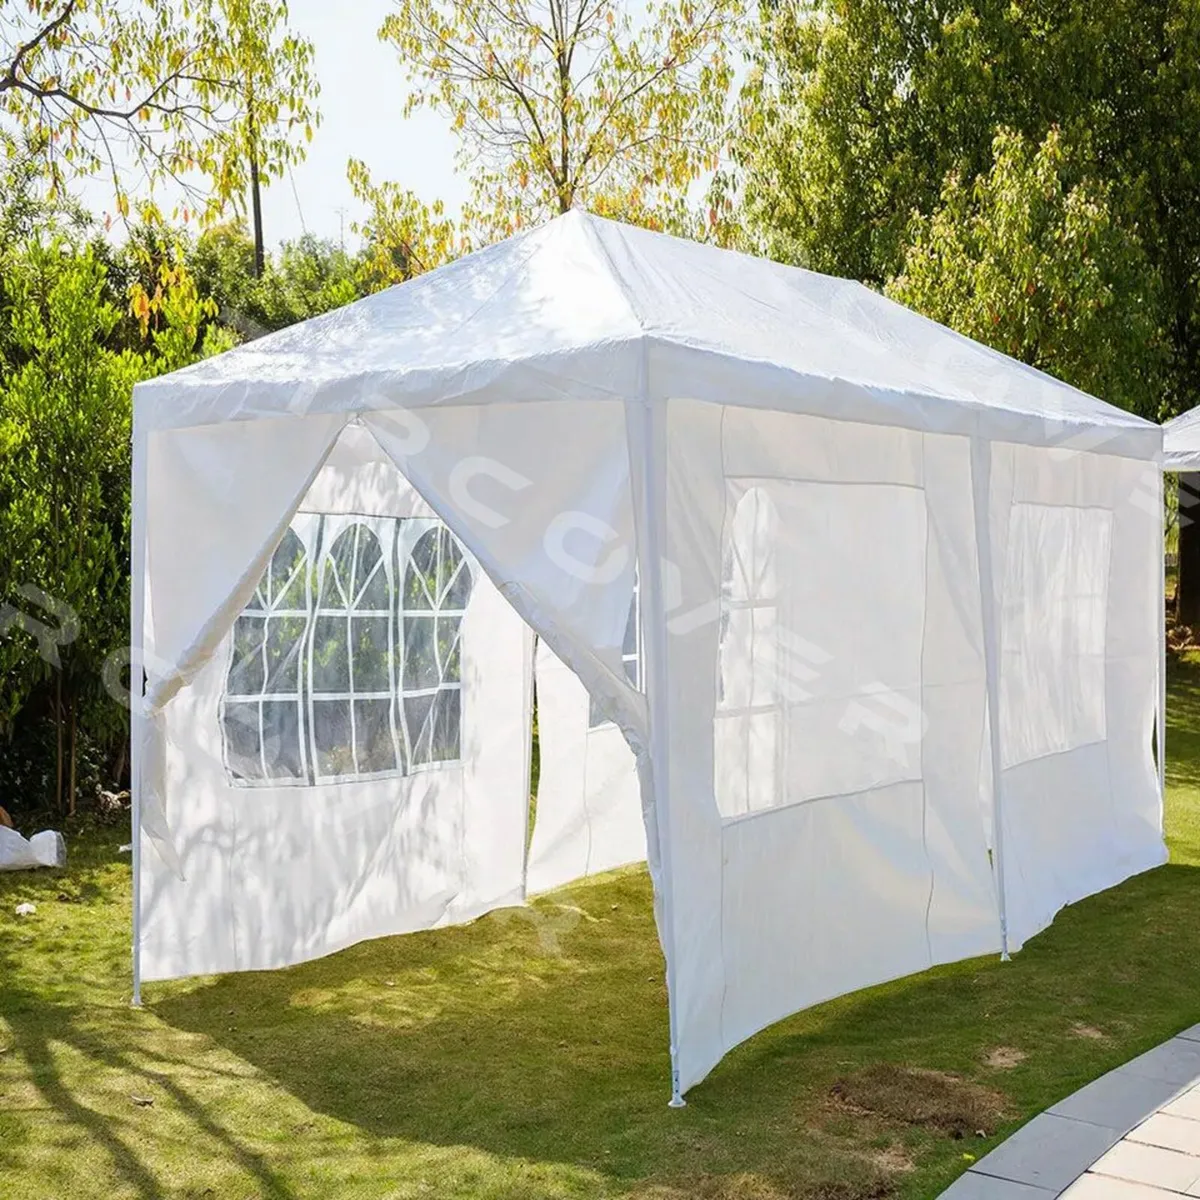 Canopy Tent - 3m x 9m (10ft x 30ft) fully enclosed